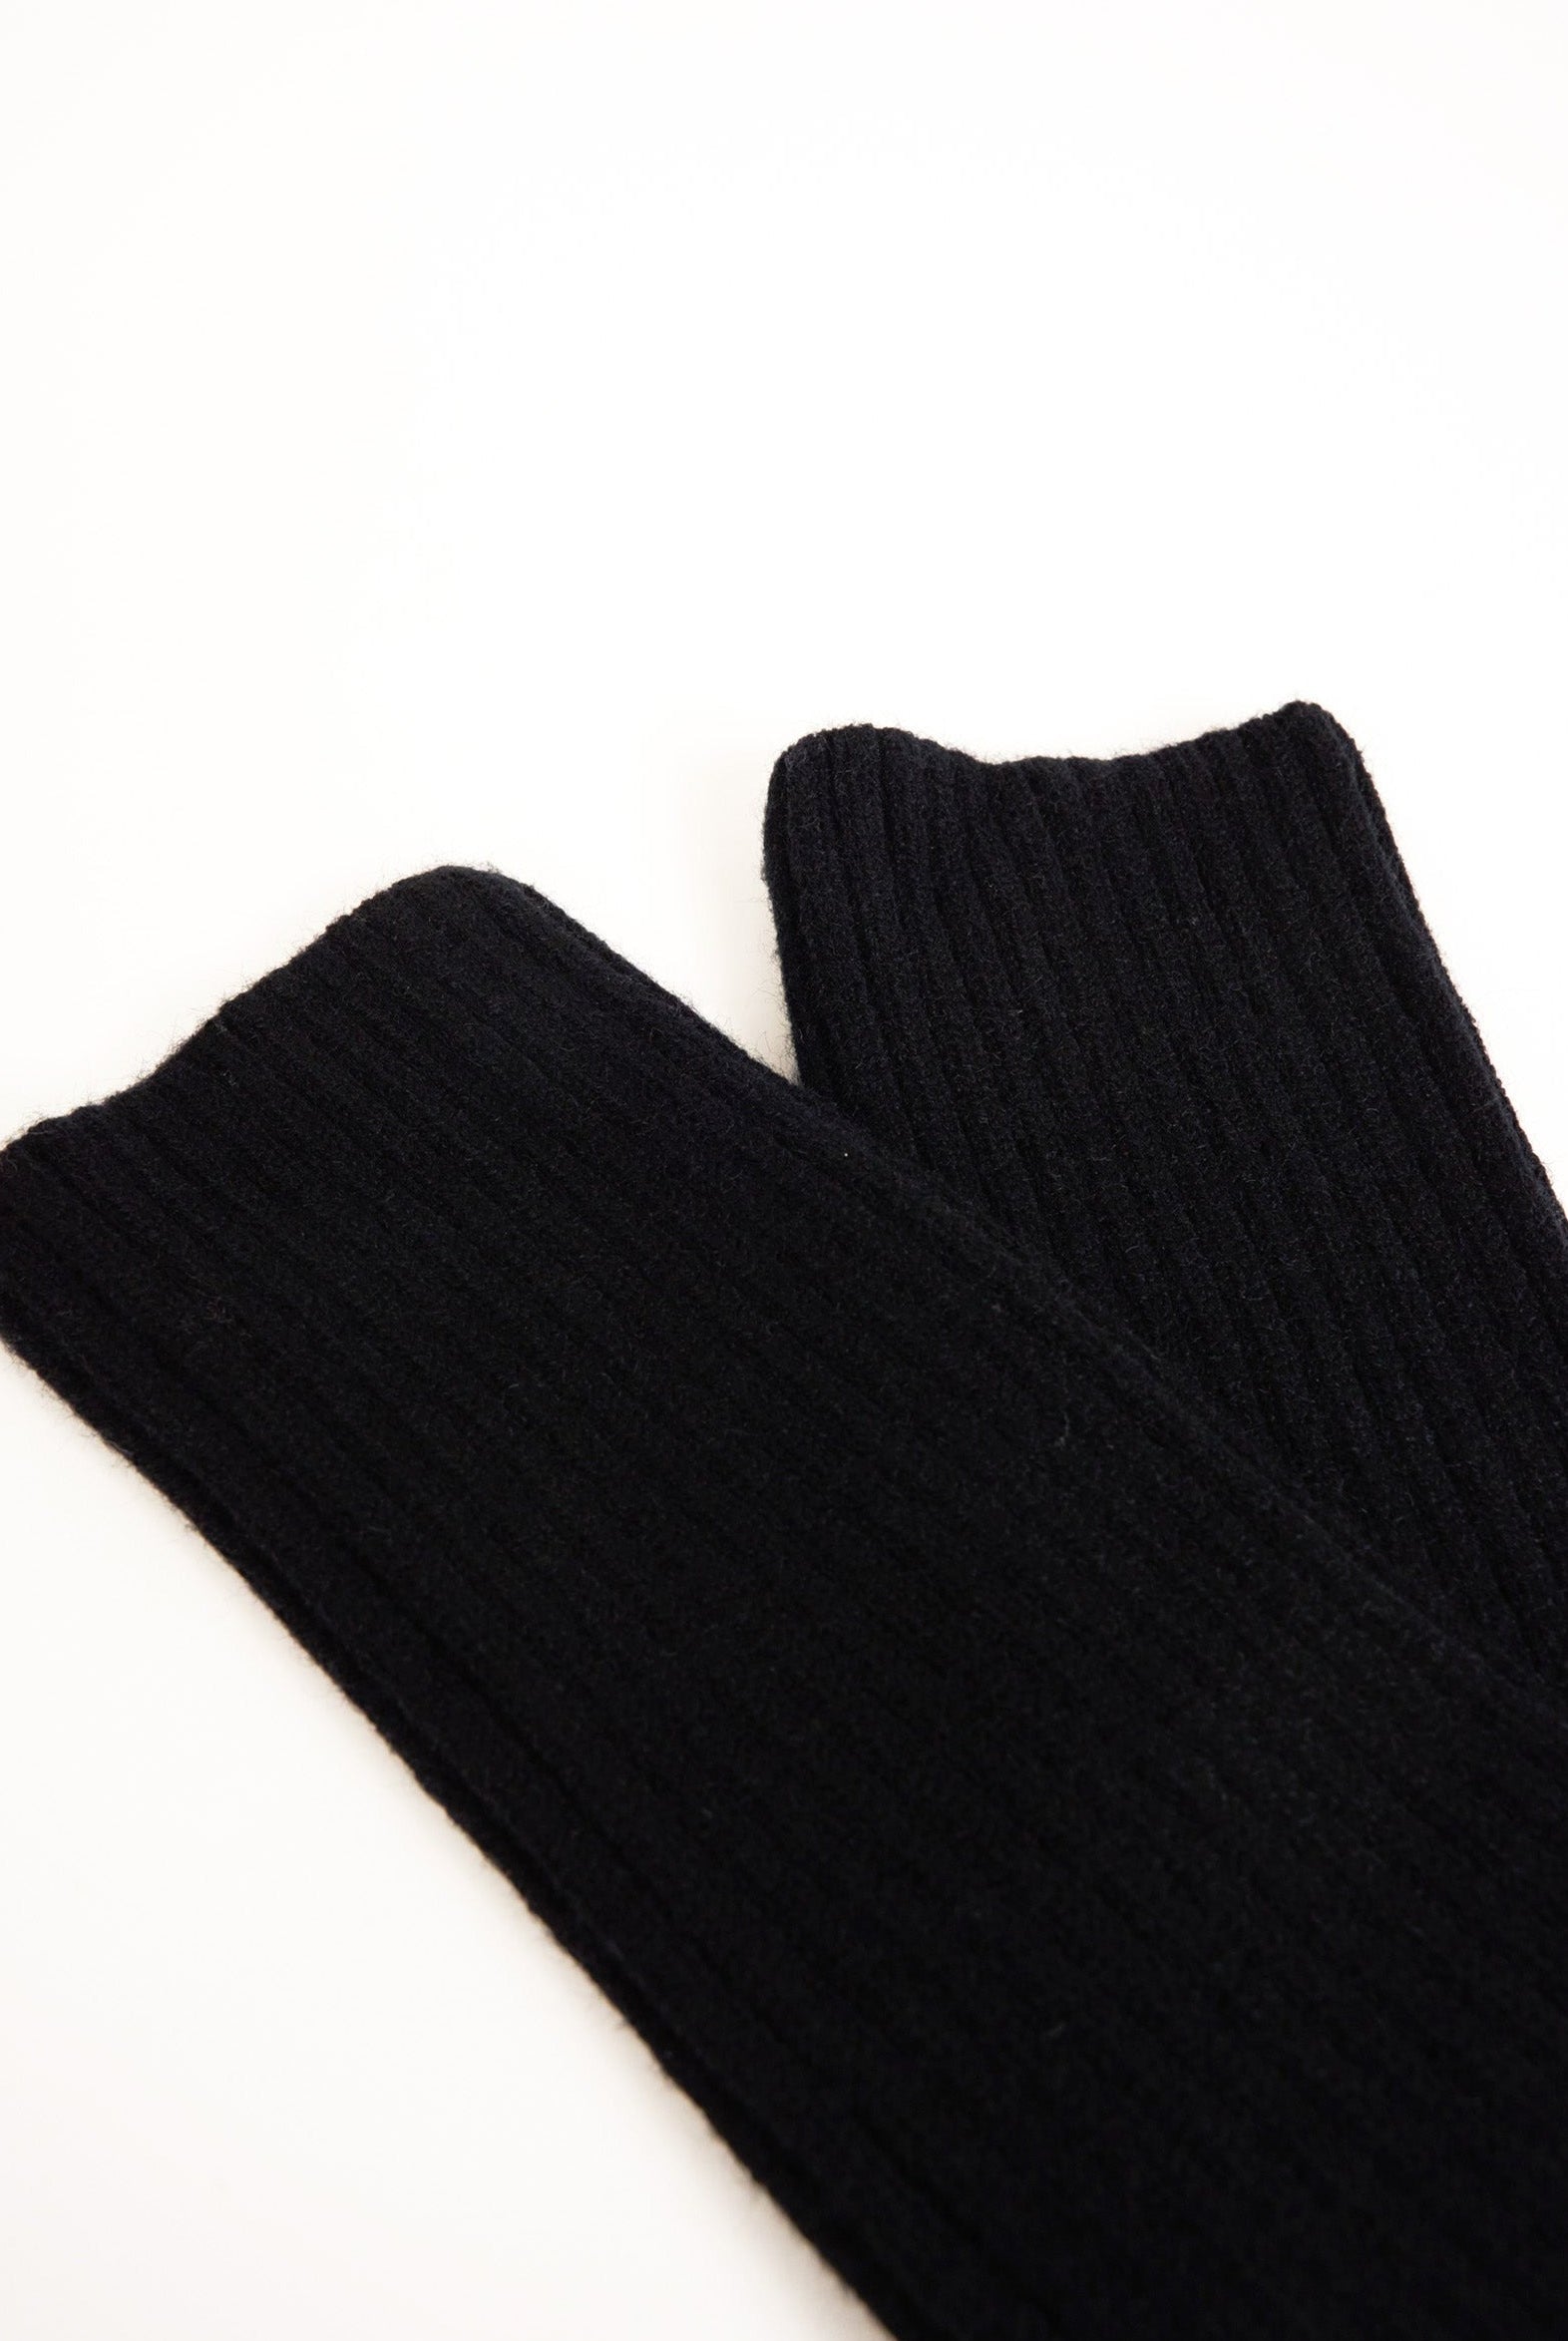 Knitted Leg Warmers in Black | Knitwear | ribbed | y2k | Grunge | grunge sleaze | indie | whimsygoth | e girl | plaza core | winter | Autumn | 90s | streetwear | casual |